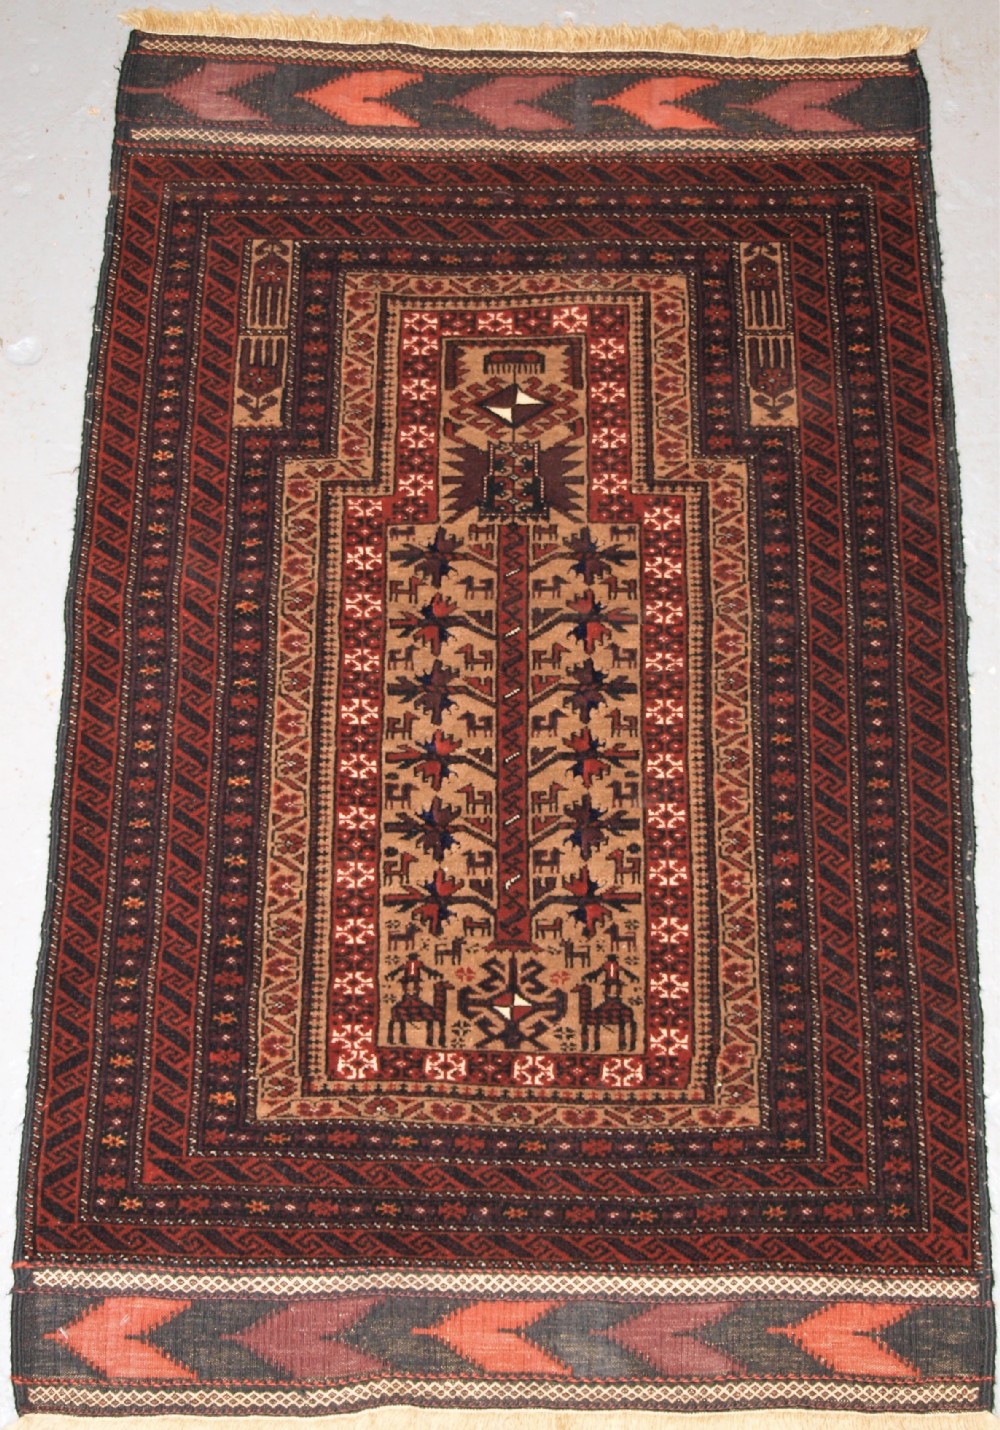 old baluch prayer rug tree of life camel ground great condition circa 192030